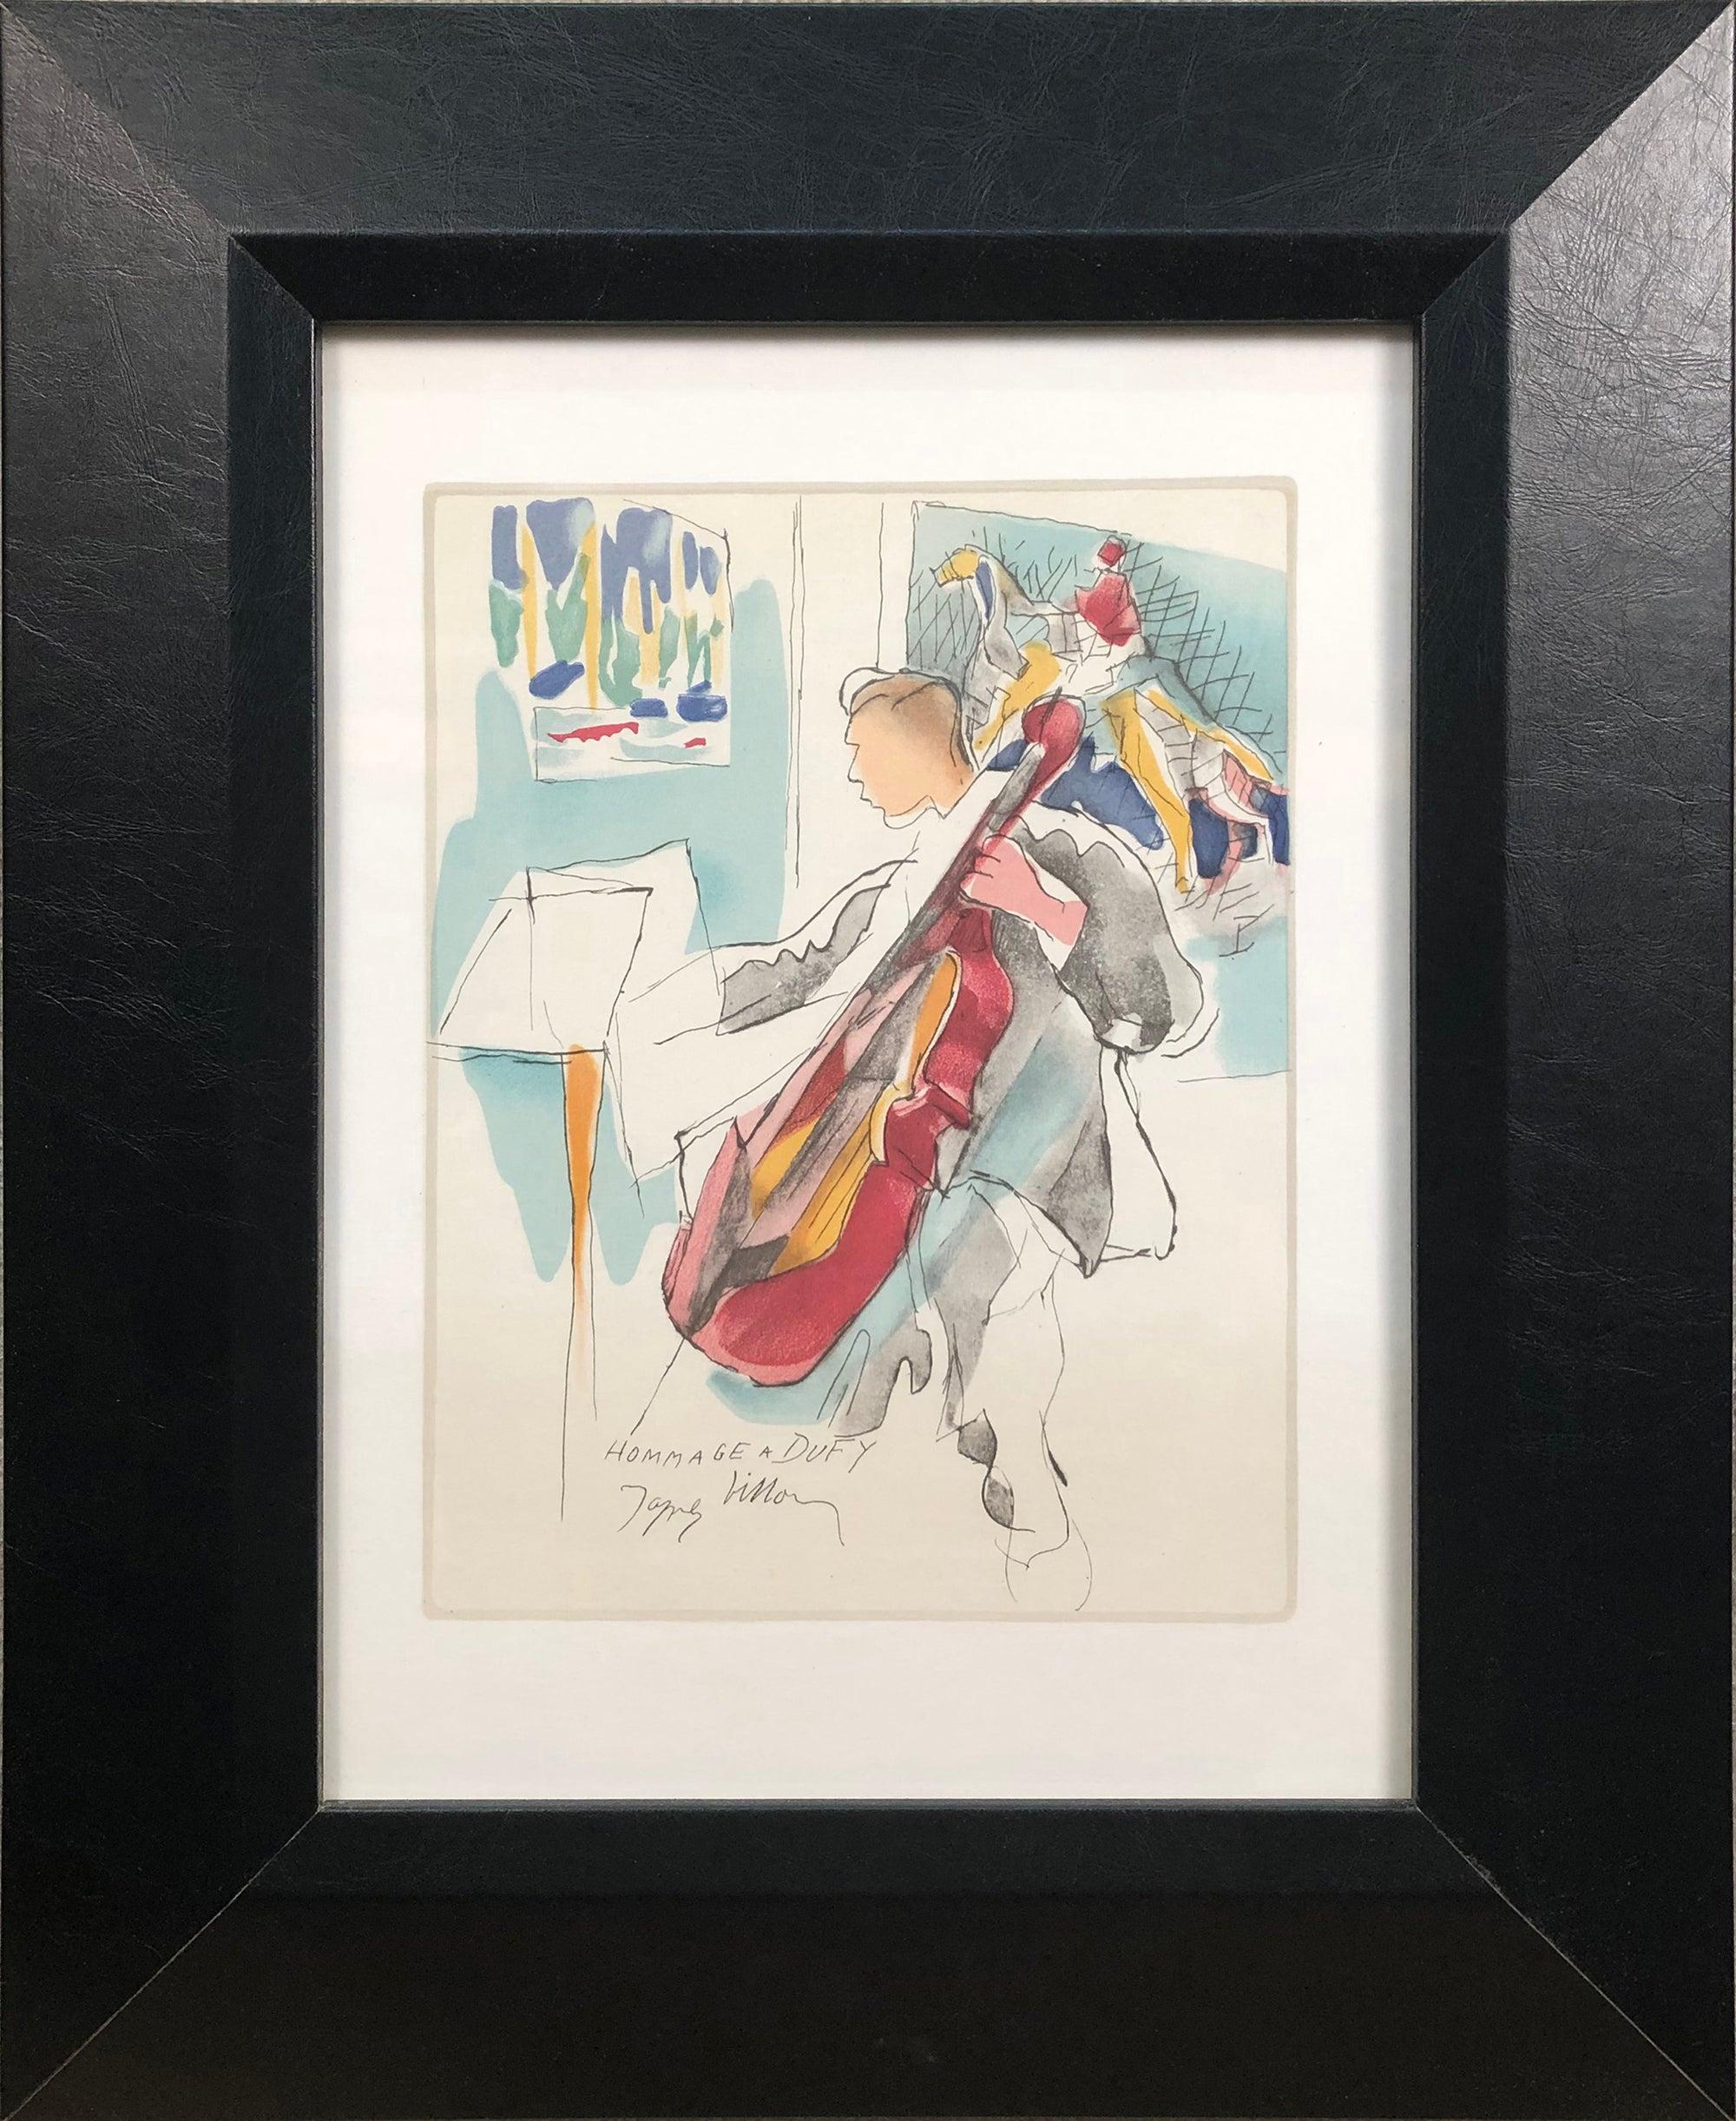 Image Size: 9 x 6.75 inches ( 22.86 x 17.145 cm )
Framed: Yes
Frame Size: 16.5 x 13.5
Condition: A-: Near Mint, very light signs of handling
Additional Details: Lithograph from the book 'Lettre a mon Peintre' by Marcelle Oury. Printed on velin